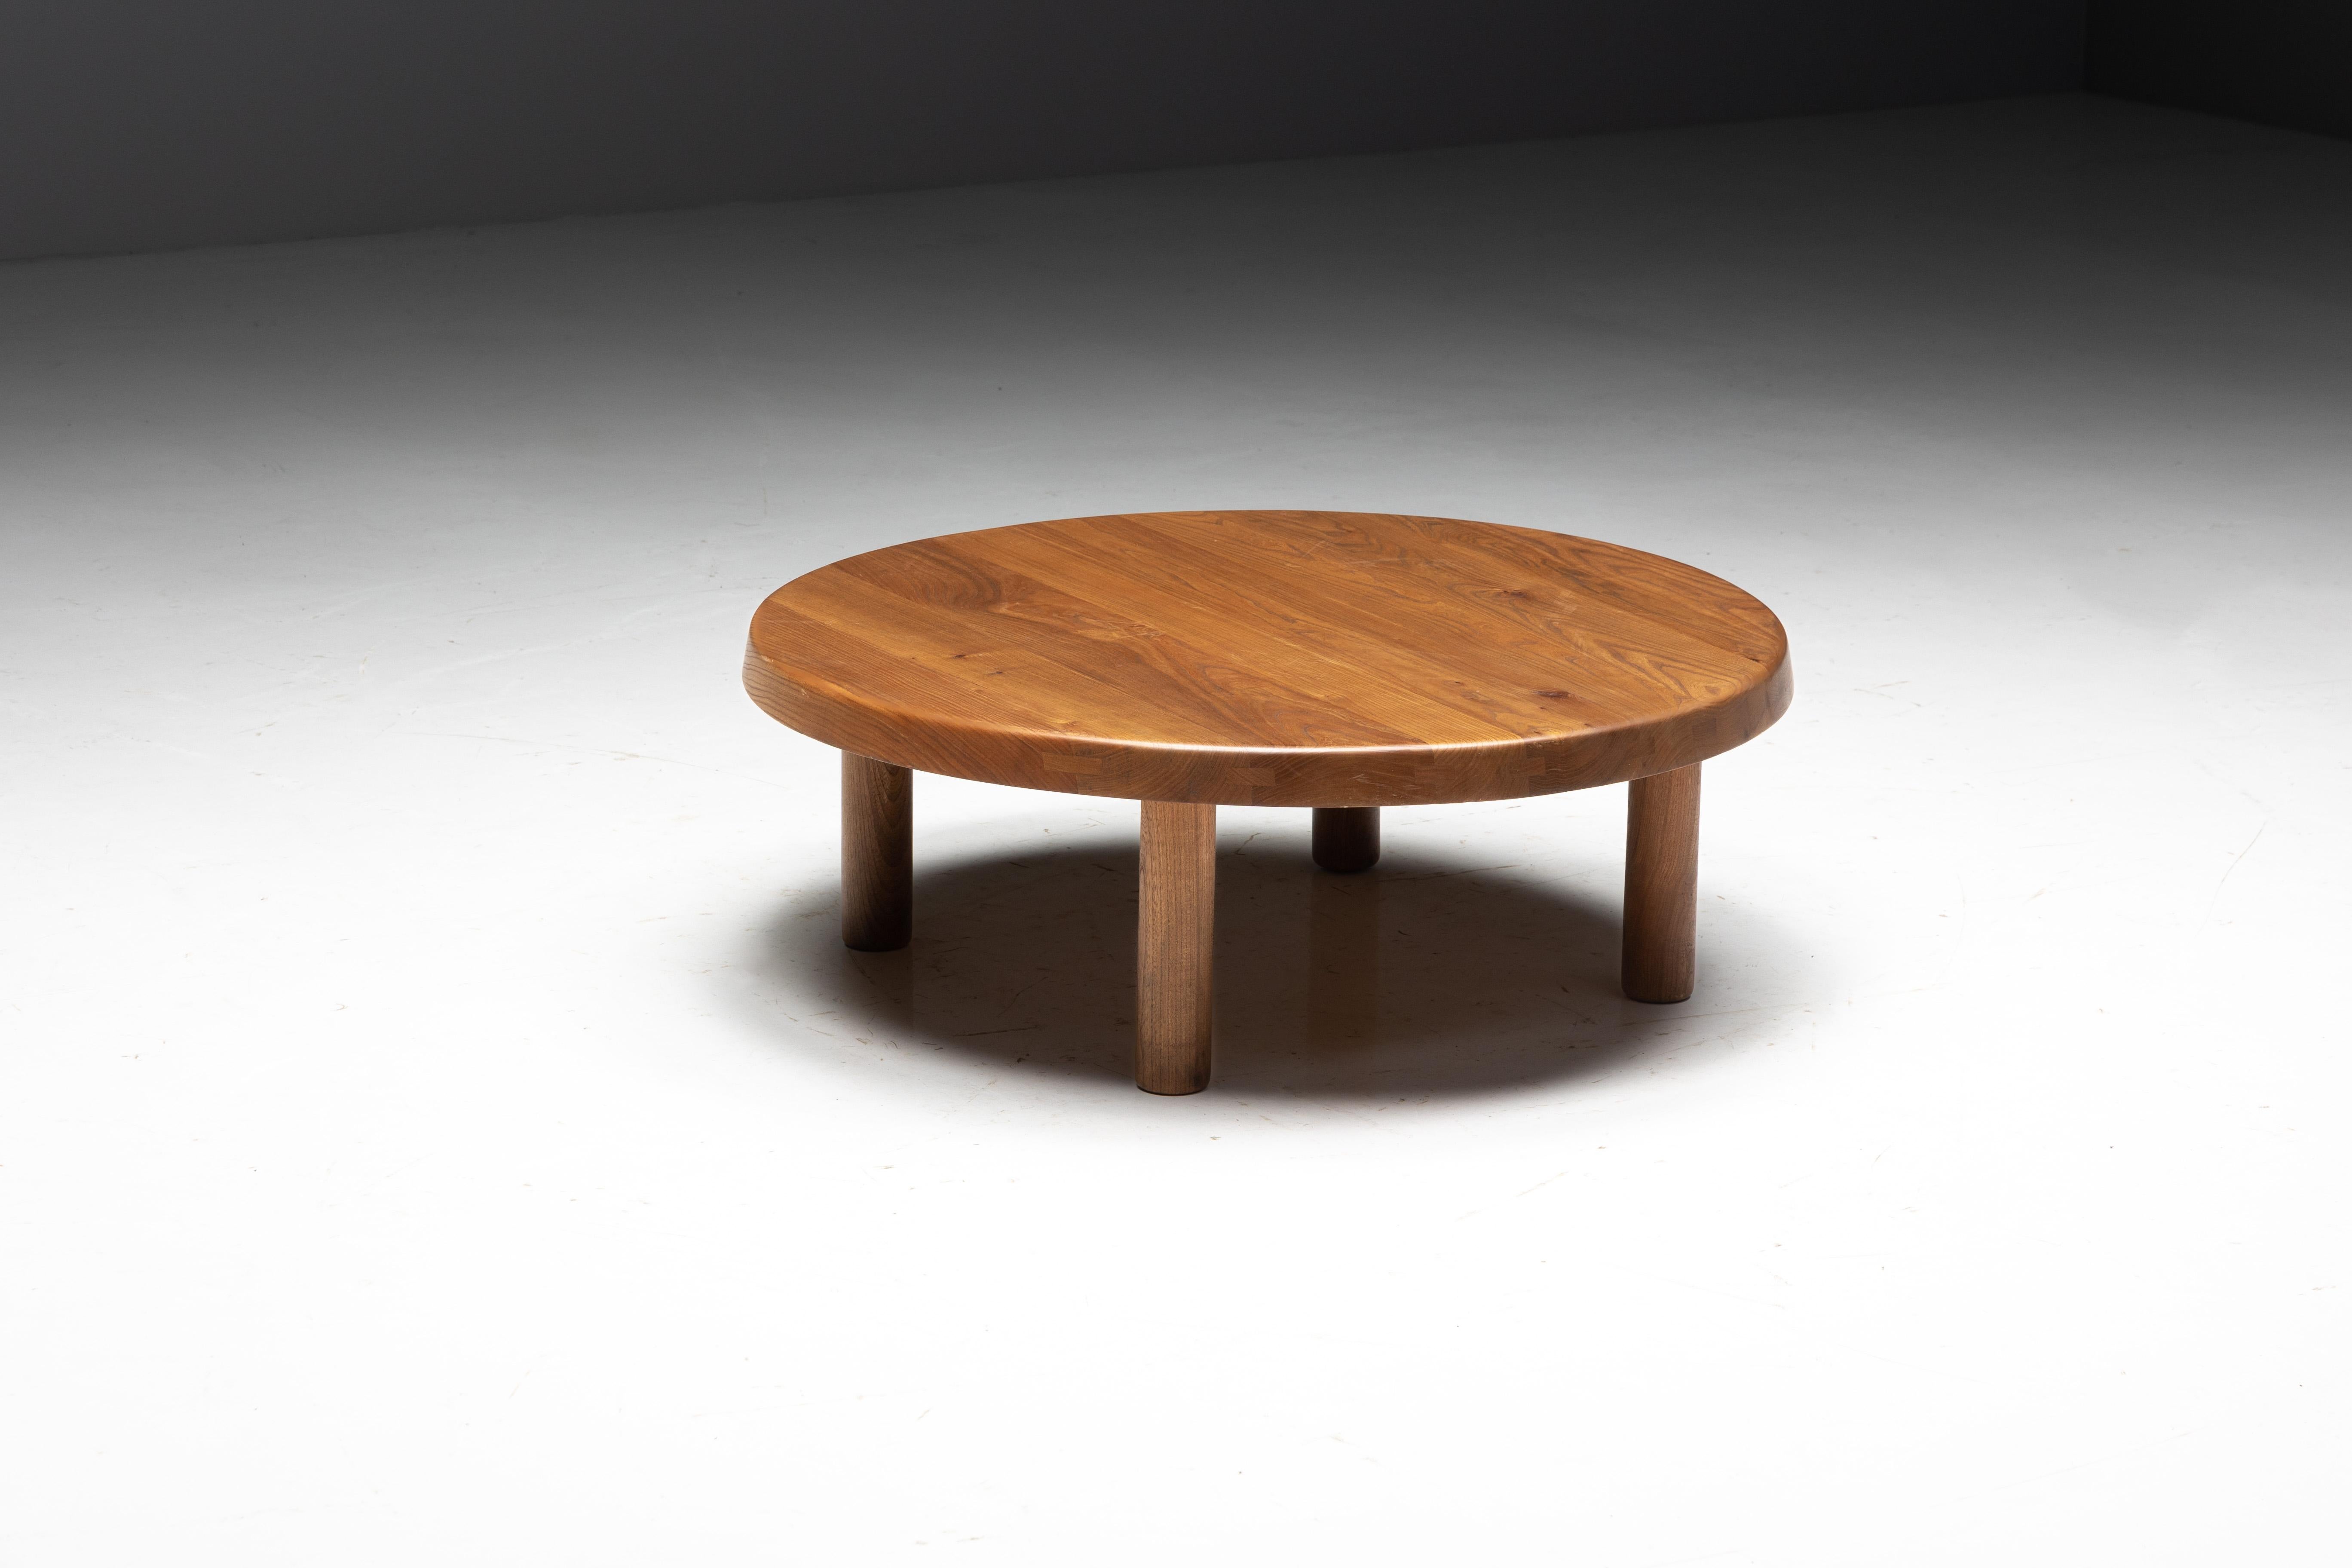 Pierre Chapo early edition 'T02' coffee table, designed and manufactured in his own workshop in France in the 1960s. Handmade in solid elmwood, this table is designed to make a lasting impression. This piece features a stunning round top that is